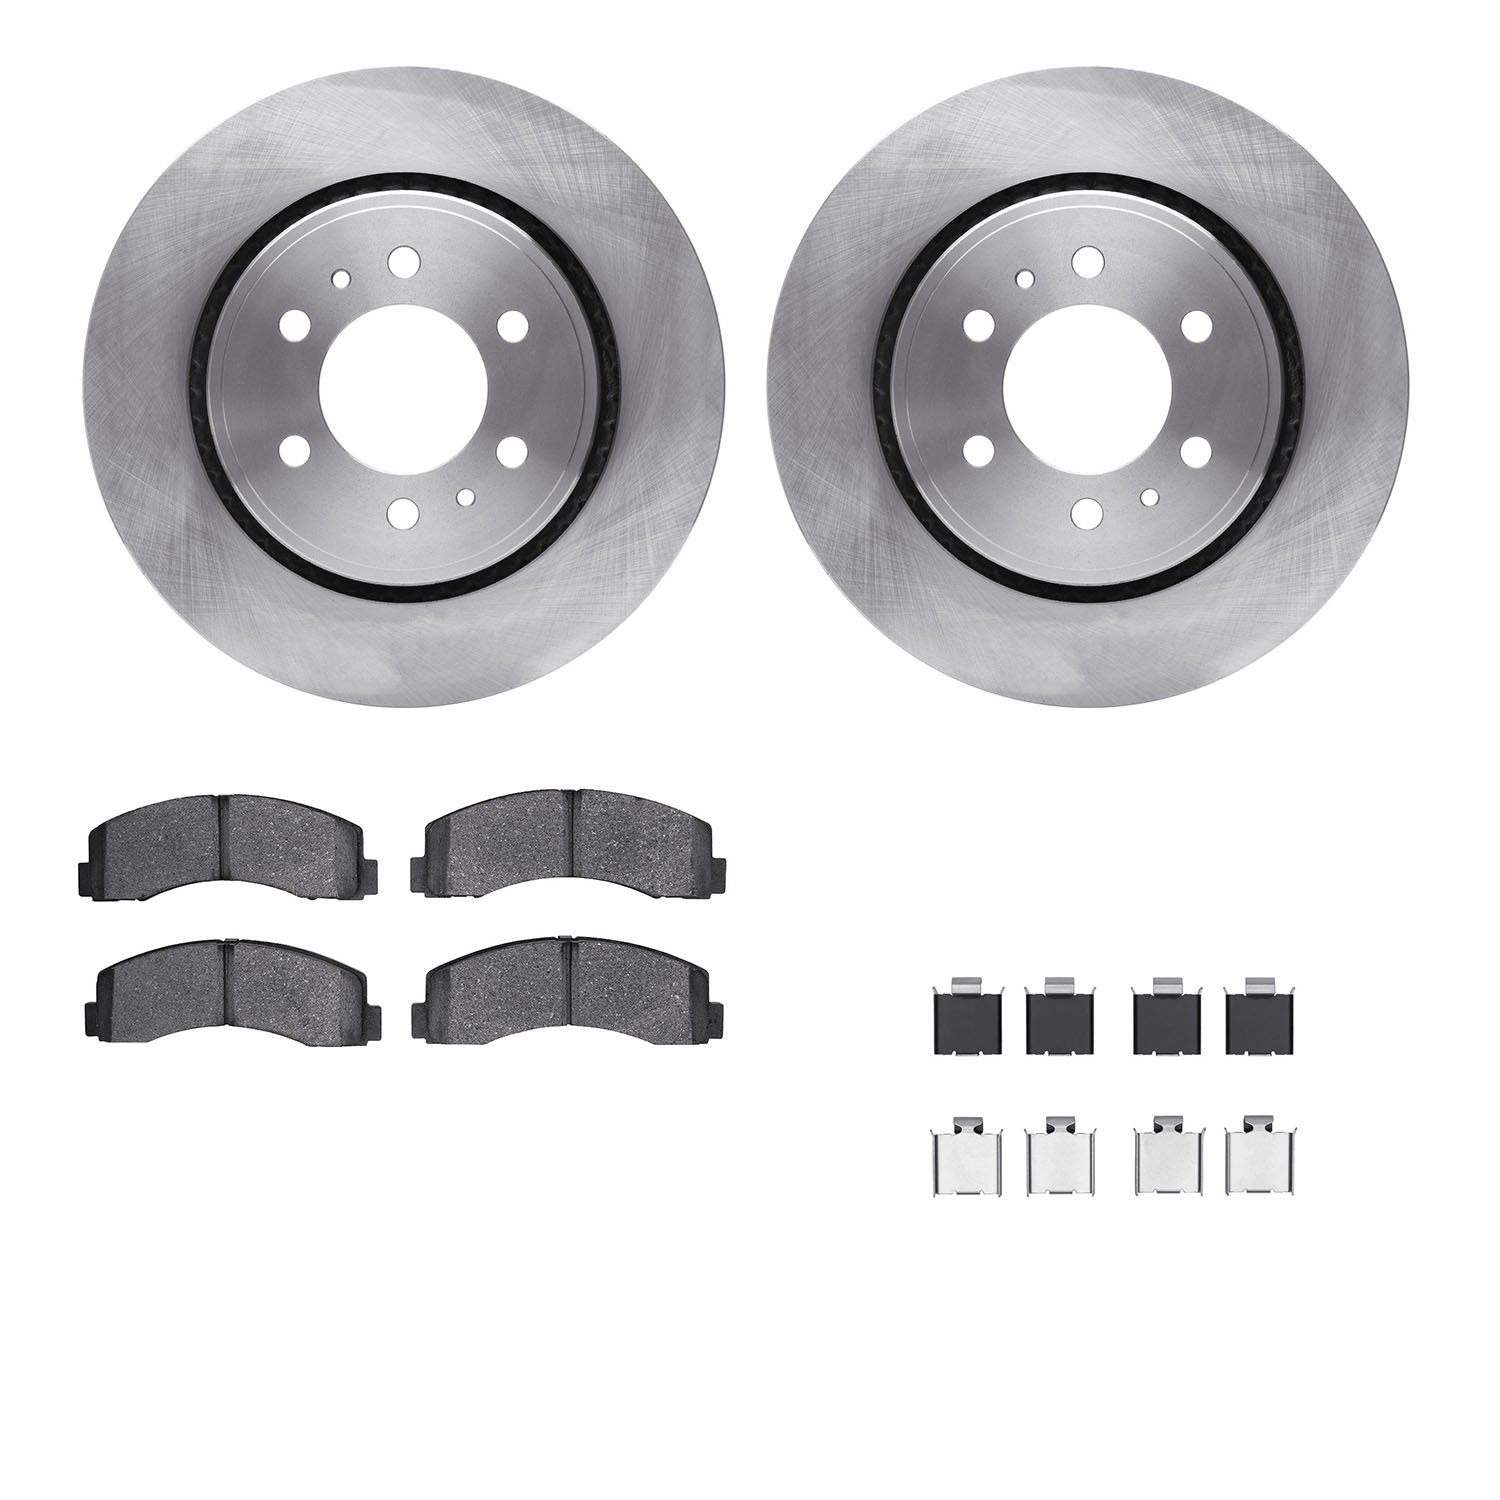 6412-54266 Brake Rotors with Ultimate-Duty Brake Pads Kit & Hardware, 2010-2021 Ford/Lincoln/Mercury/Mazda, Position: Front